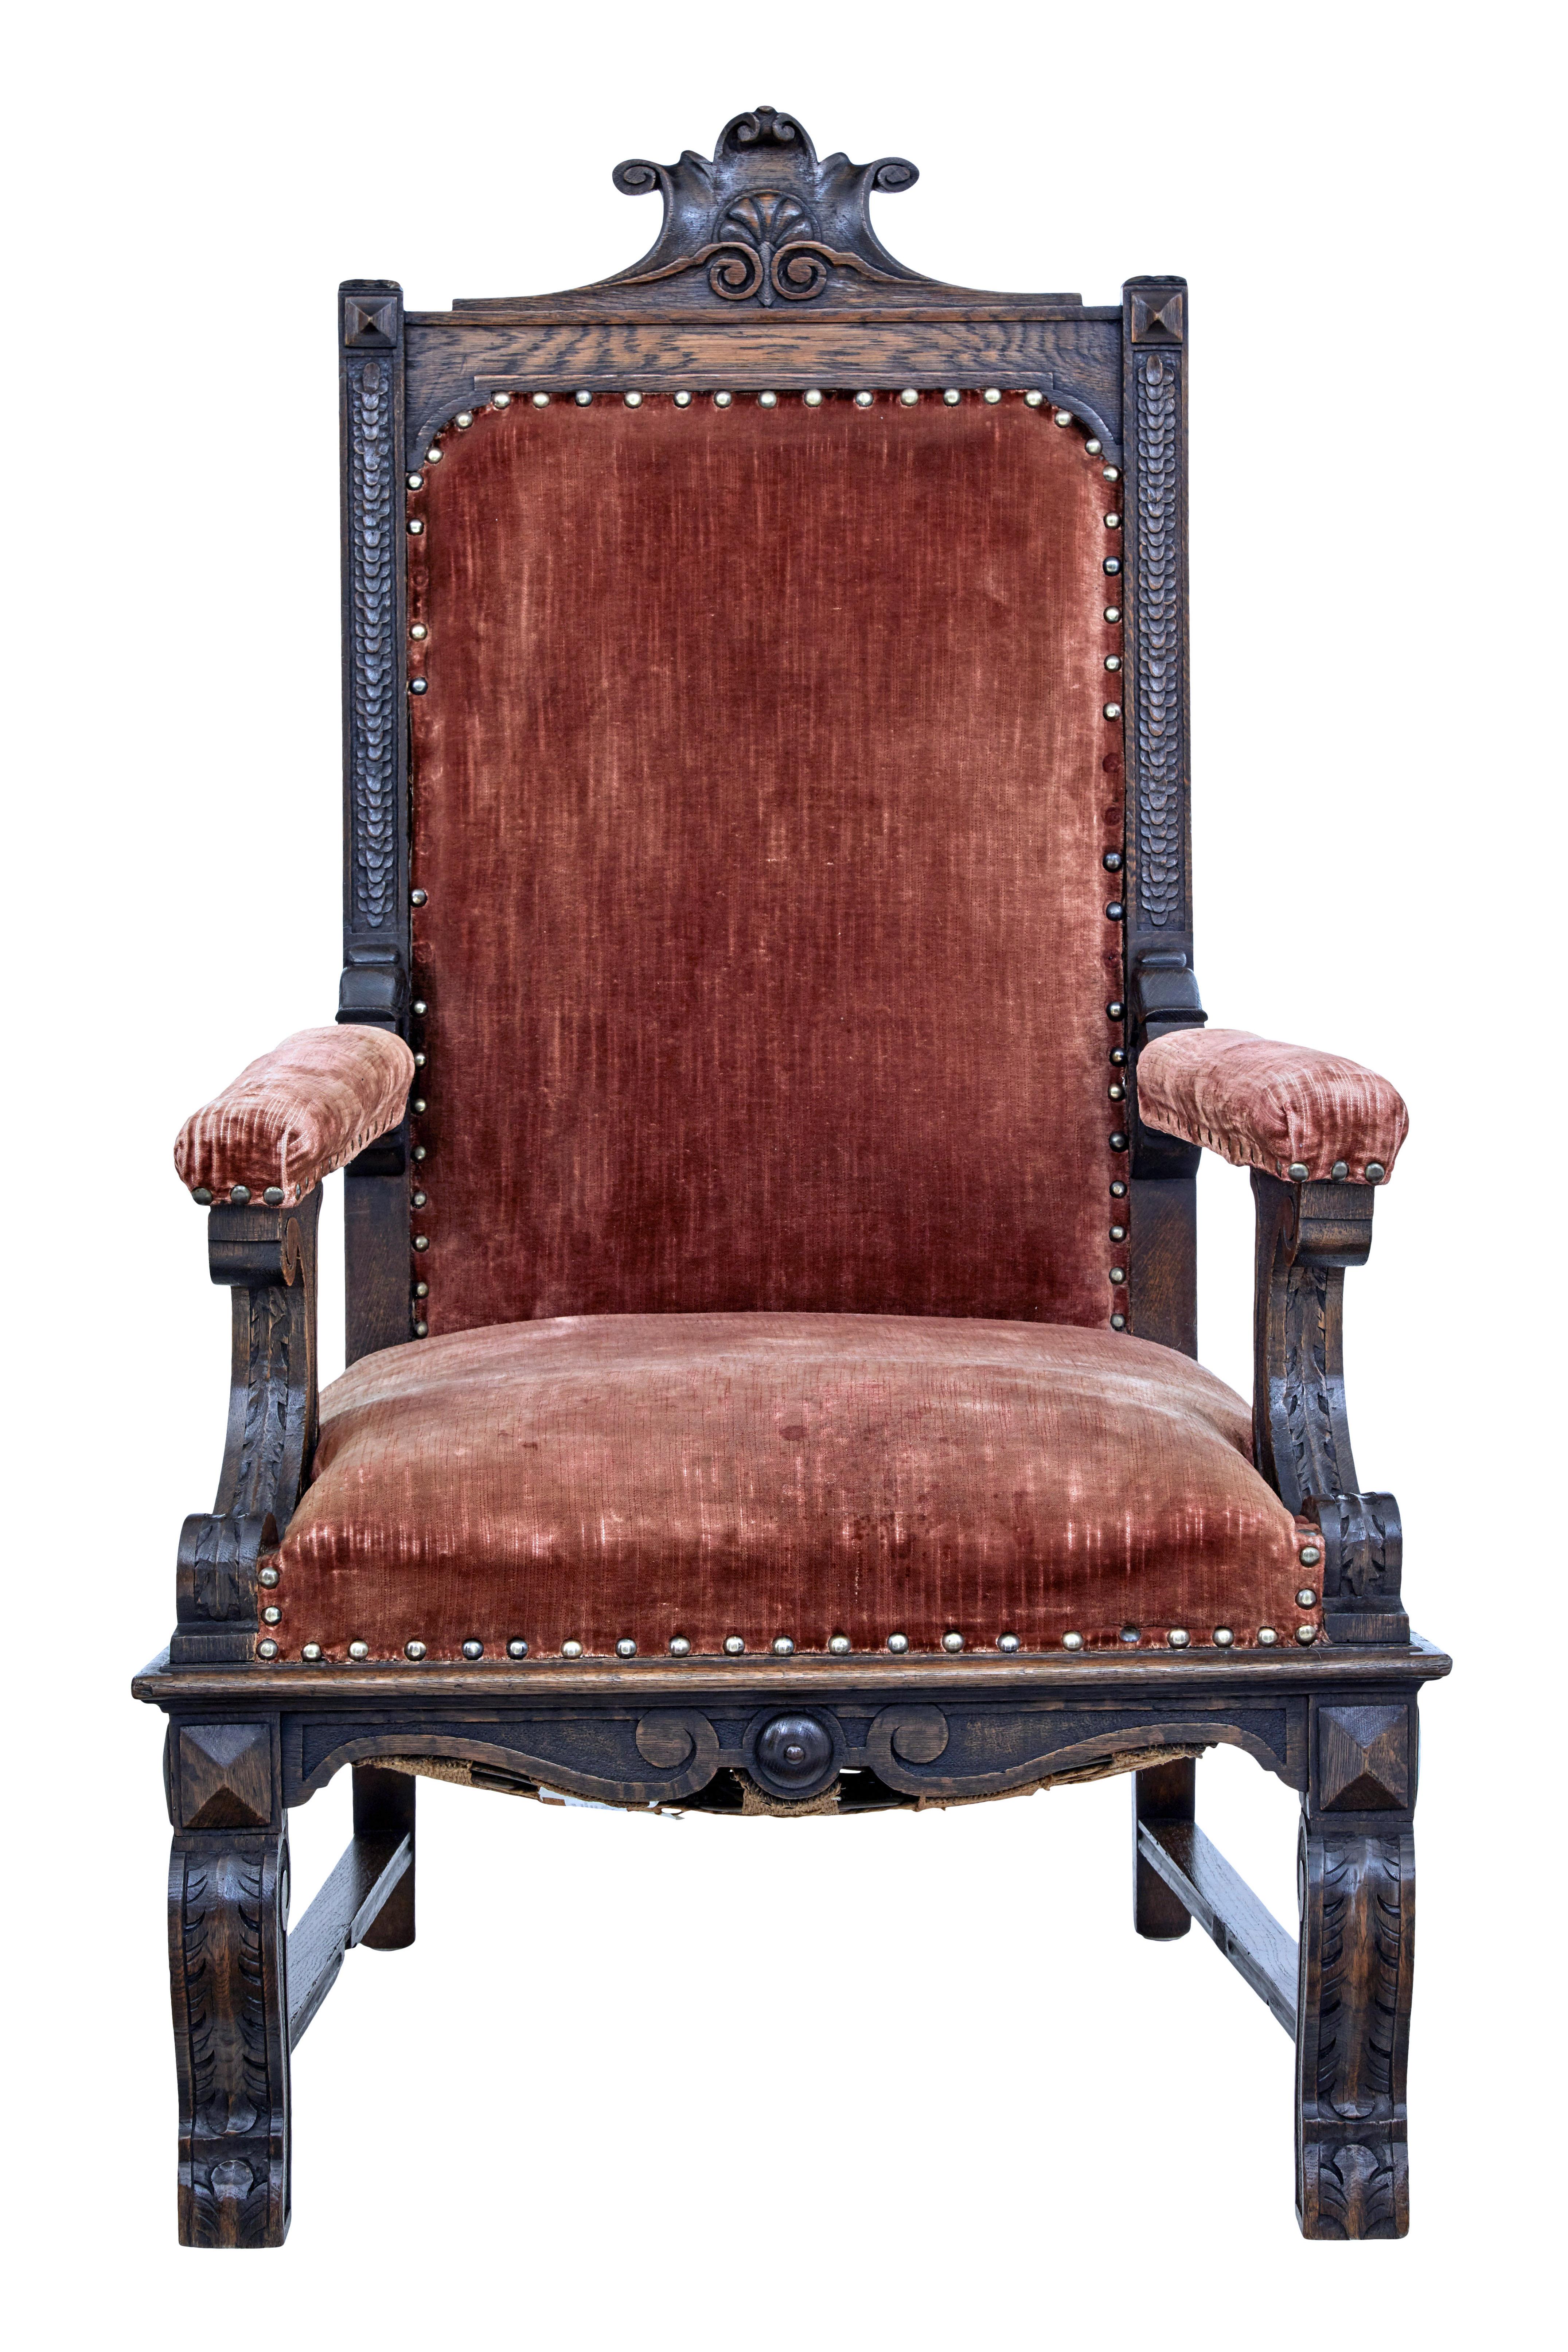 19th century Victorian carved oak throne chair circa 1880.

Grand carved oak throne chair of generous proportions.  Carved back rest with scrolls and shell.  Scrolled arm supports and carved front legs in the same taste.

Original upholstery